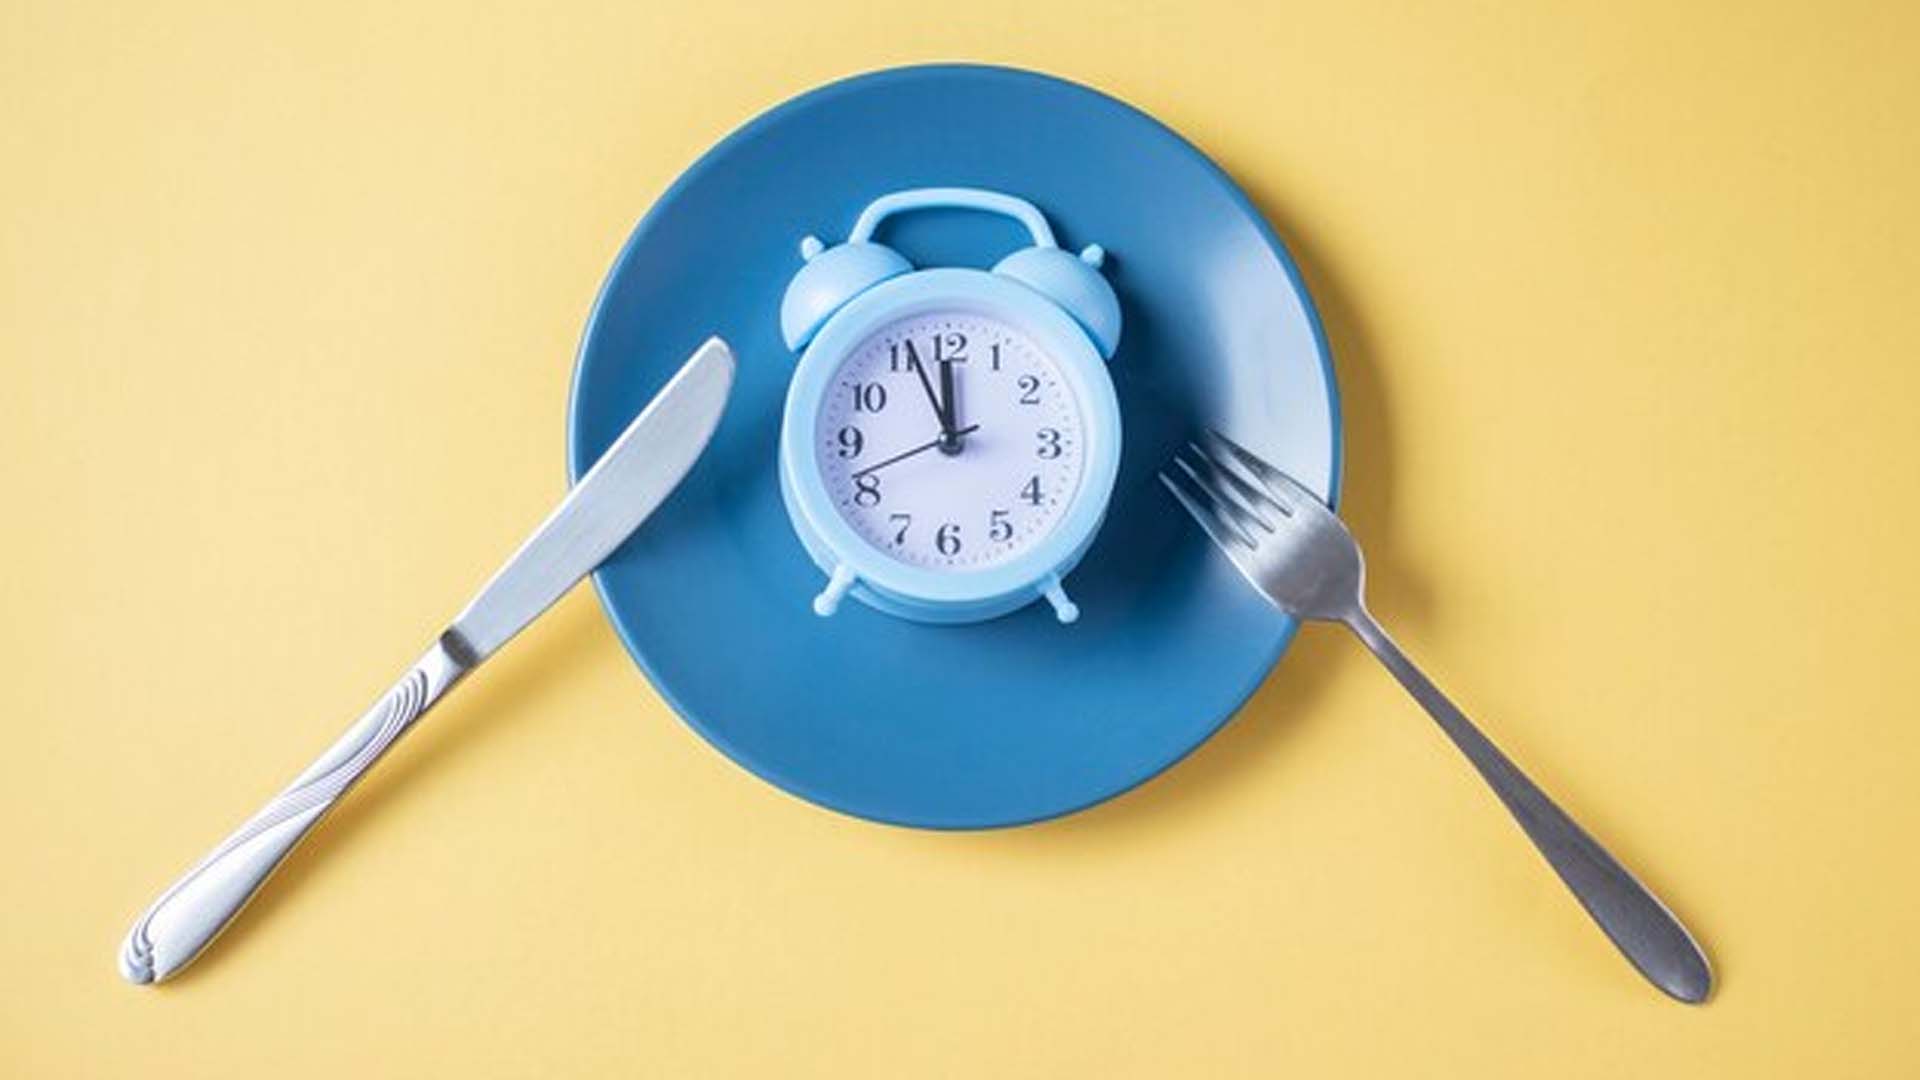 Concept of Intermittent Fasting